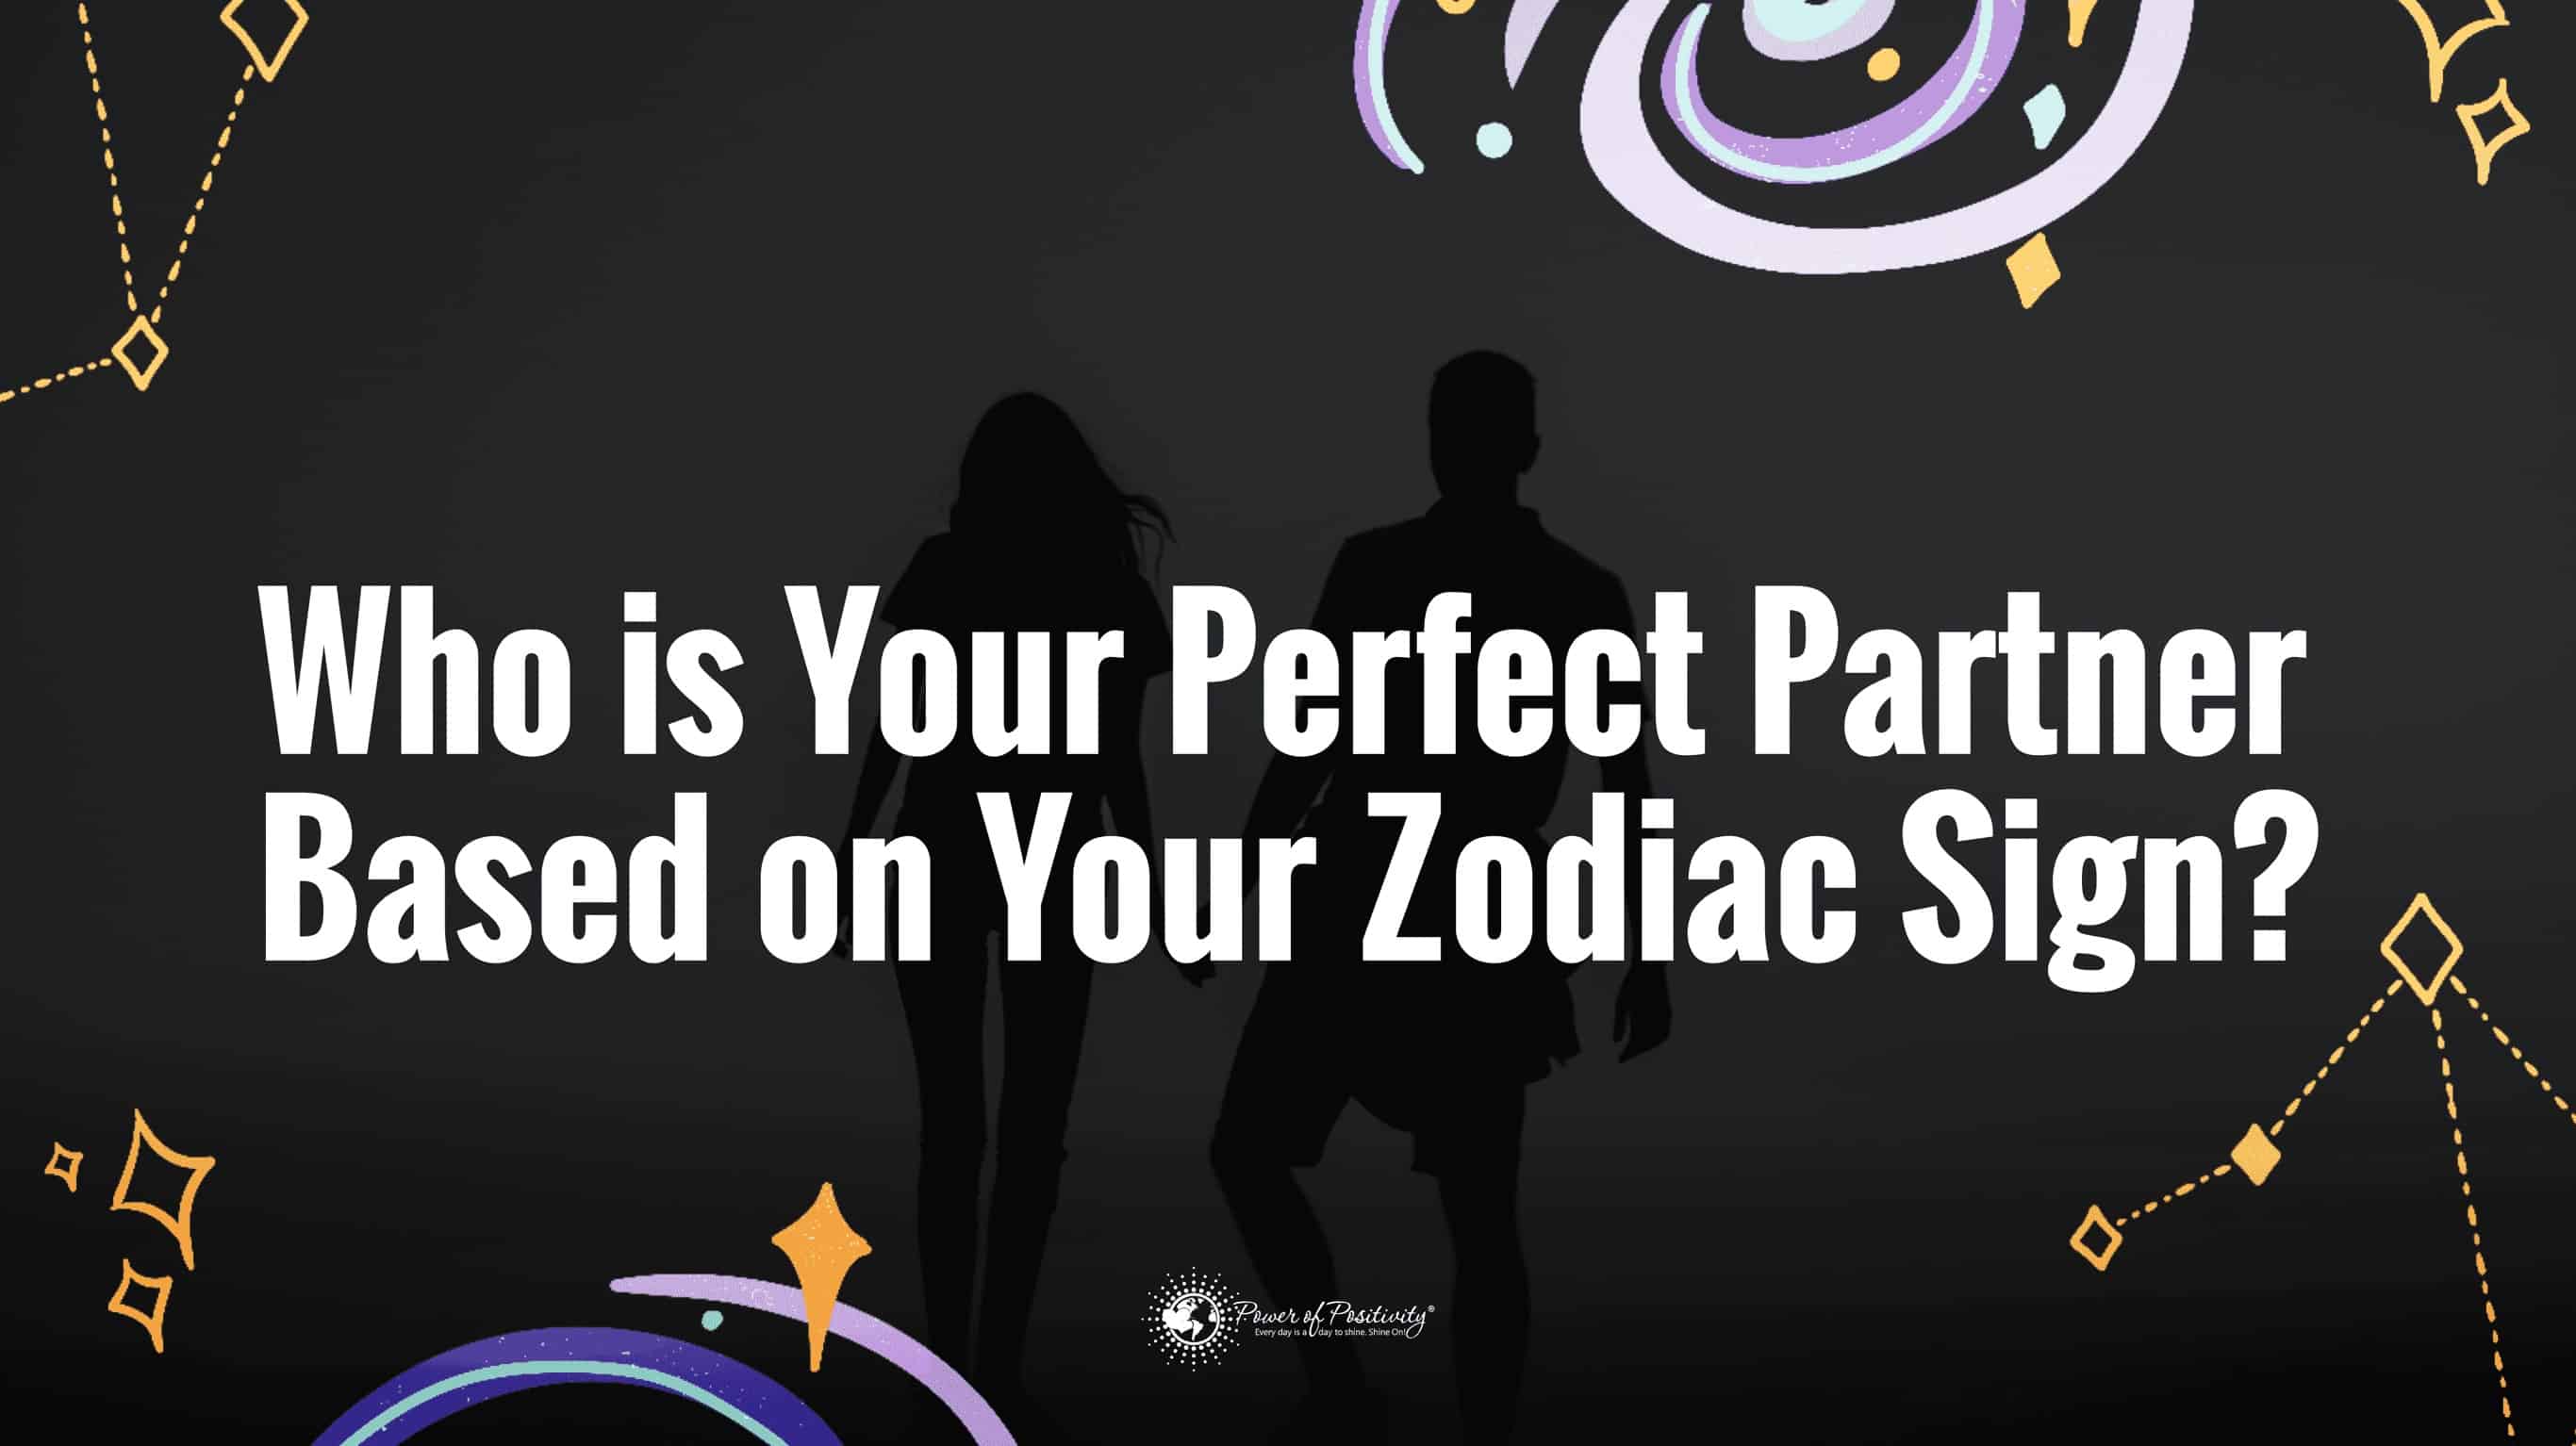 Who Is Your Perfect Partner Based On Your Zodiac Sign?